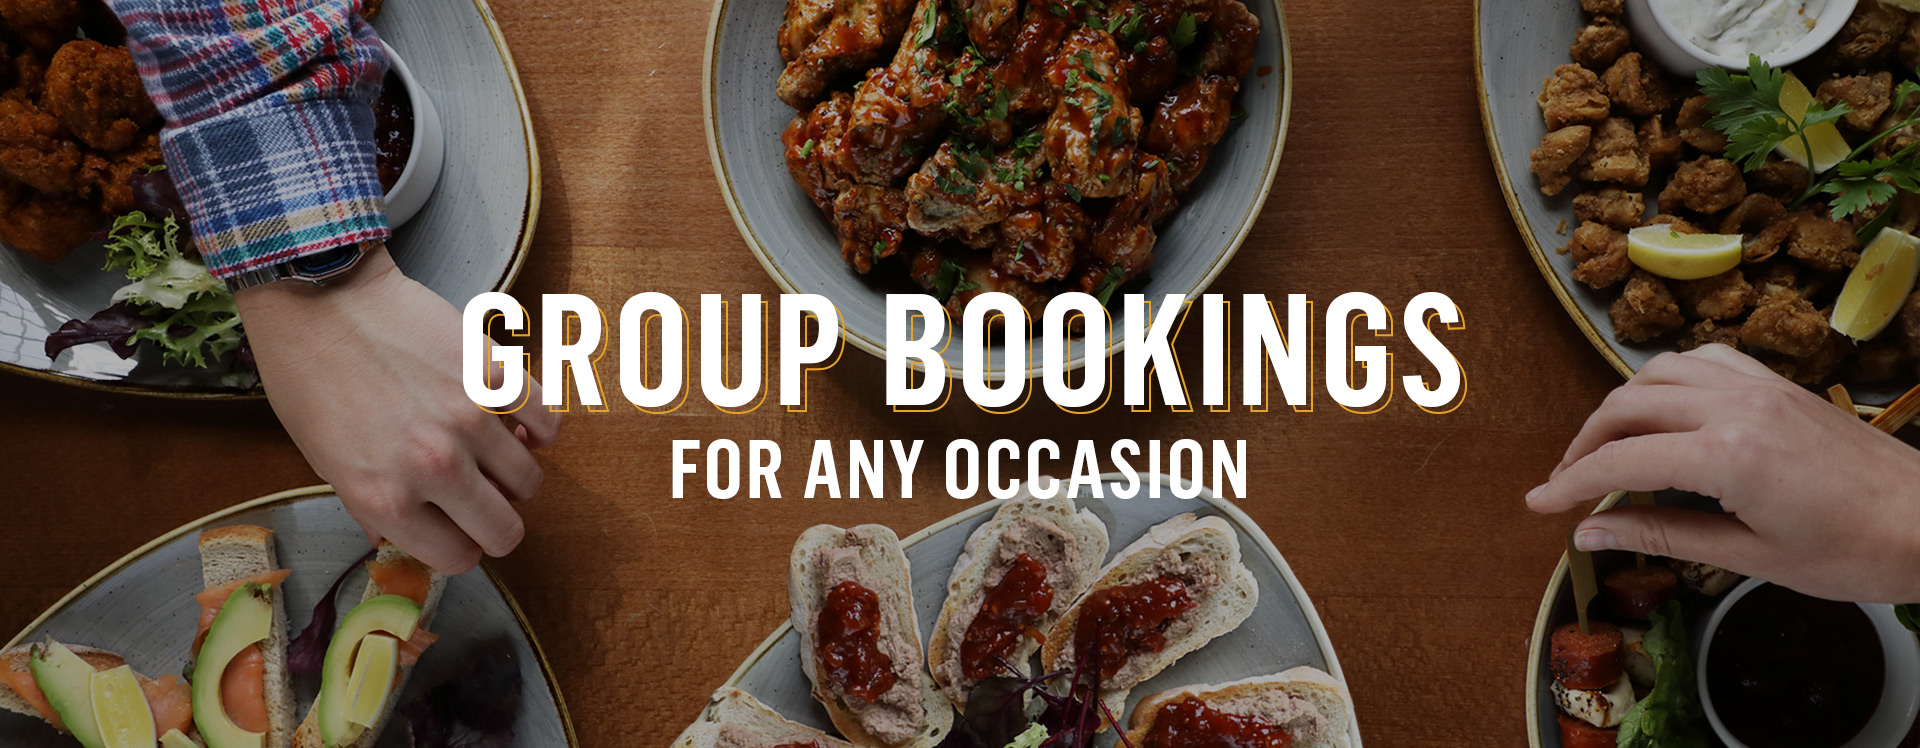 Group Bookings at The Kenilworth